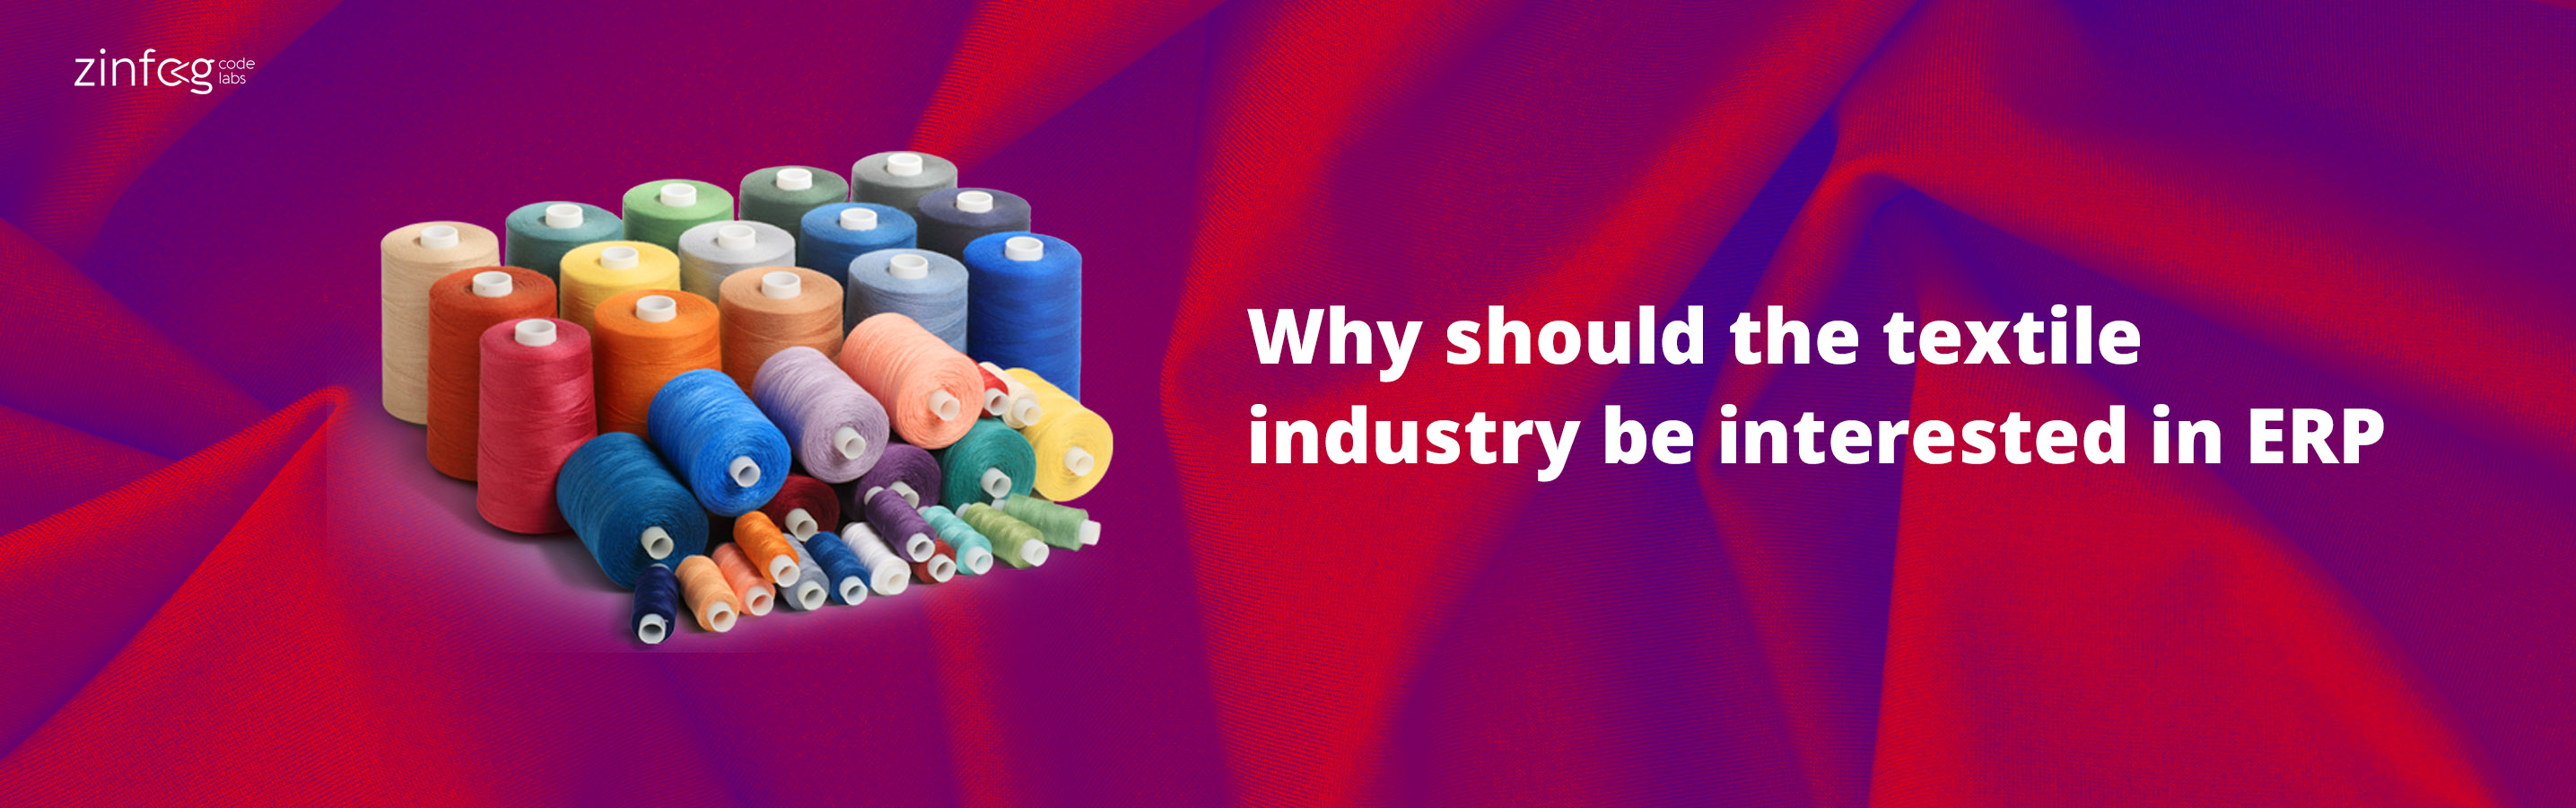 why_should_the_textile_industry_be_interested_in_erp.html